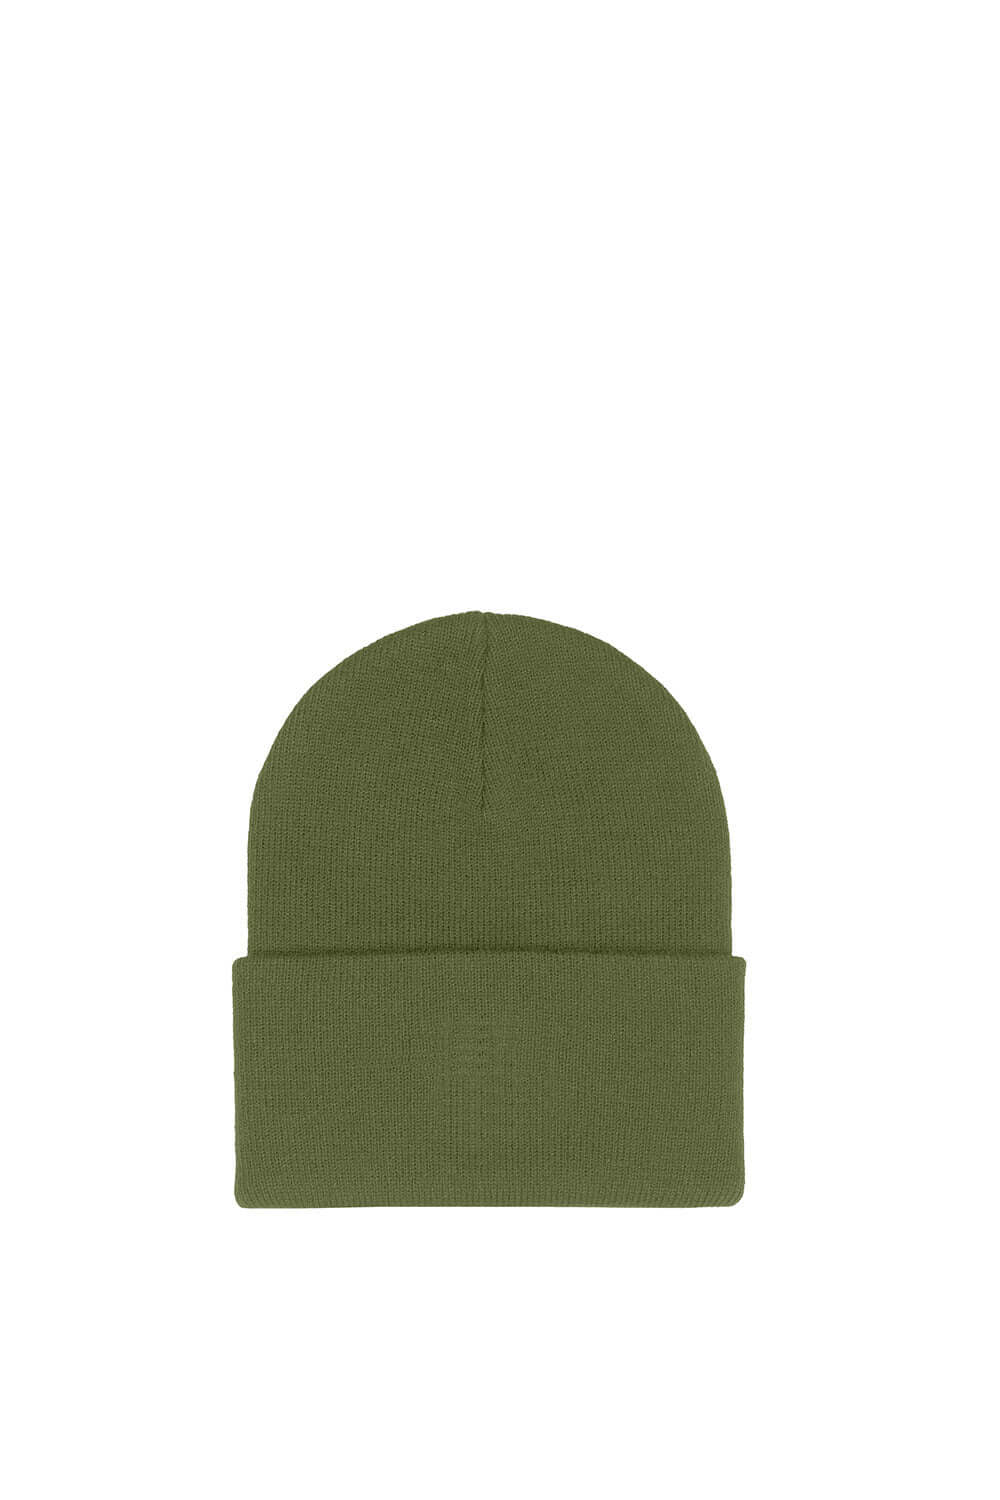 HTC LOGO BEANIE WARM WINTER HTC Los Angeles shield logo embroidered on the front. One size fit all. Color: Military HTC LOS ANGELES